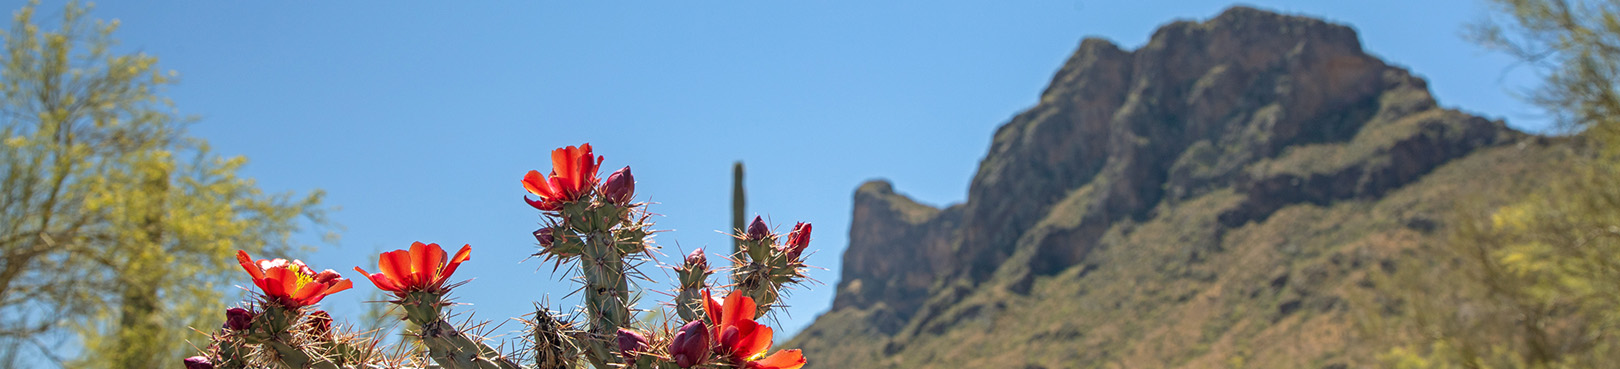 Looking past the bright red flowers of a blooming cholla to Picacho Peak towering in the background.